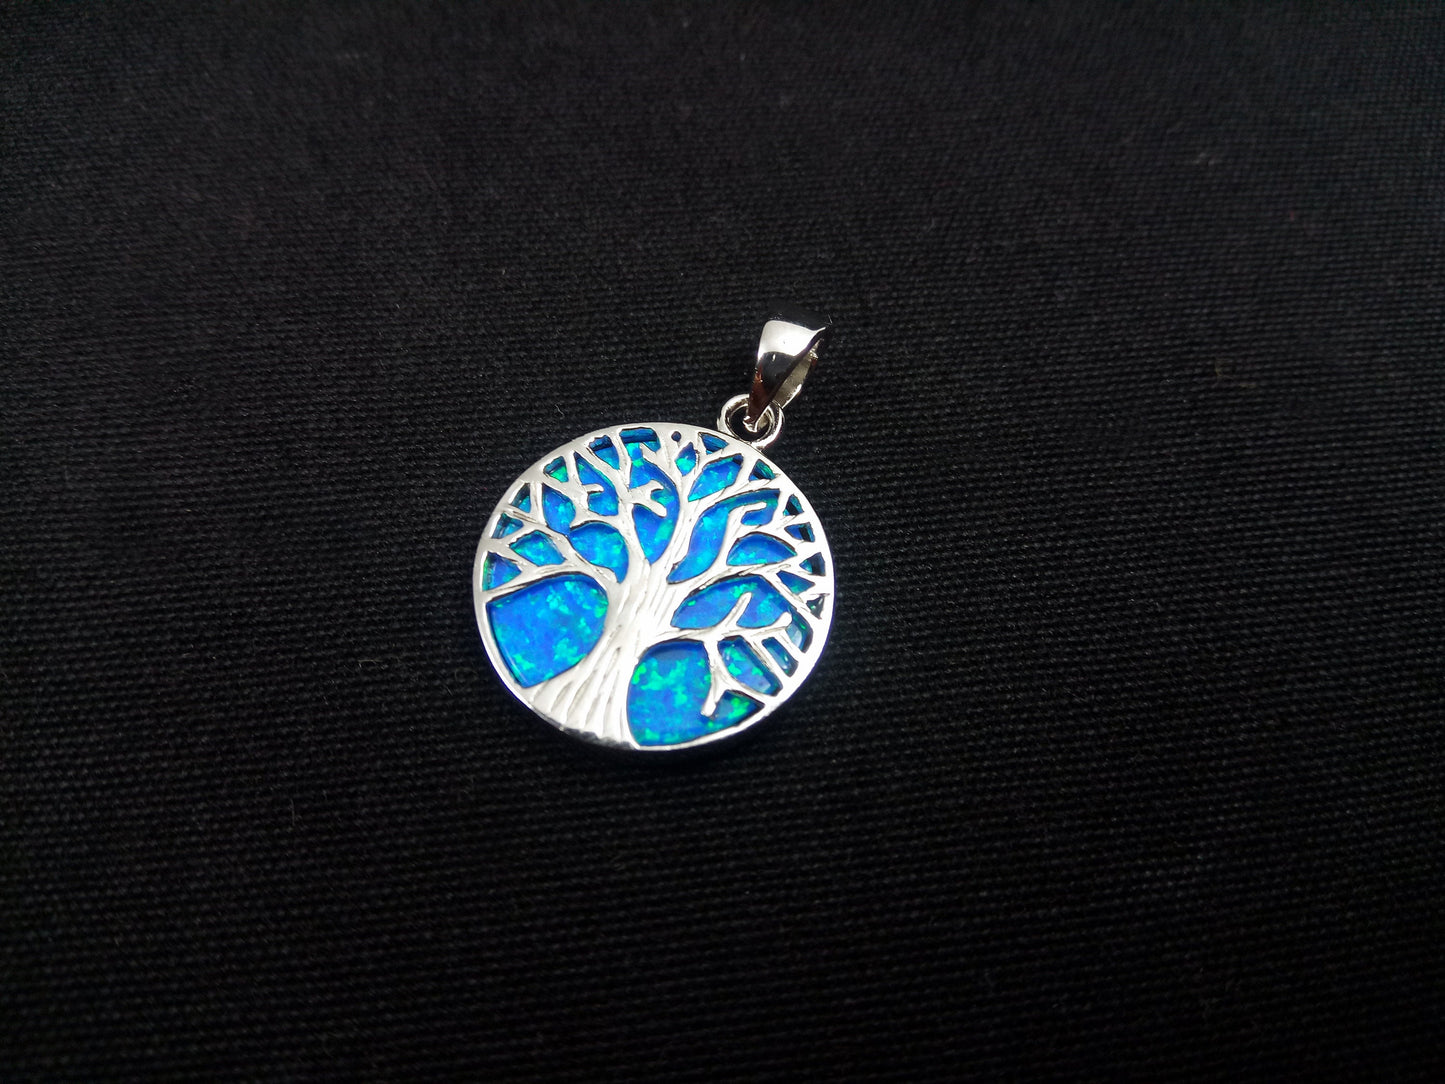 Sterling silver 925 pendant featuring a beautiful blue opal tree of life design. The pendant measures 18mm in diameter.